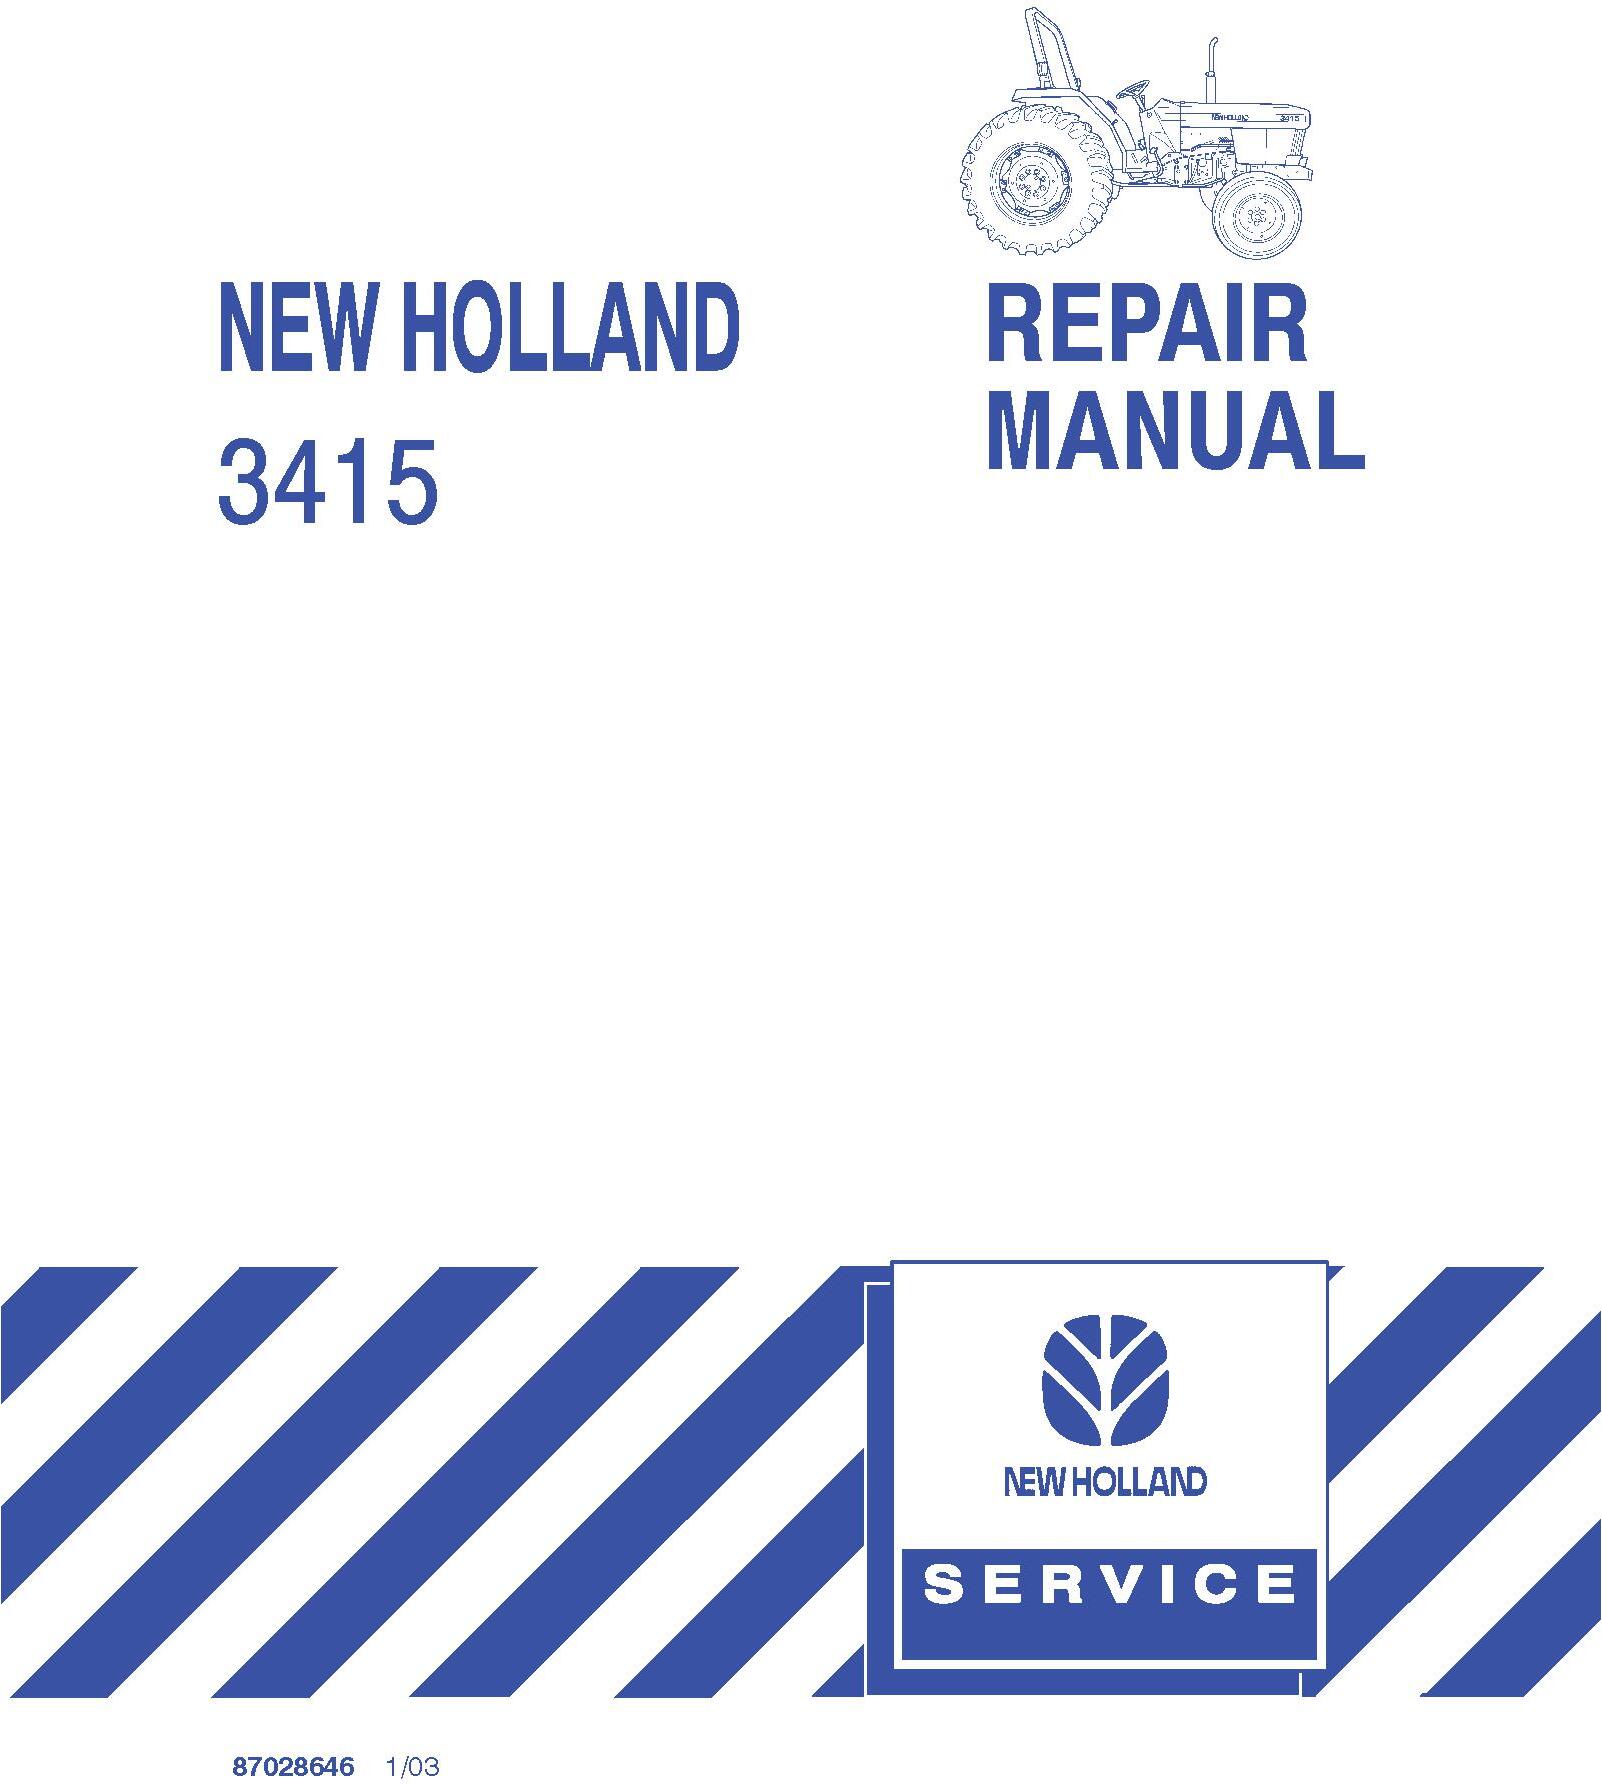 New Holland 3415 Compact Tractor Service Repair Manual